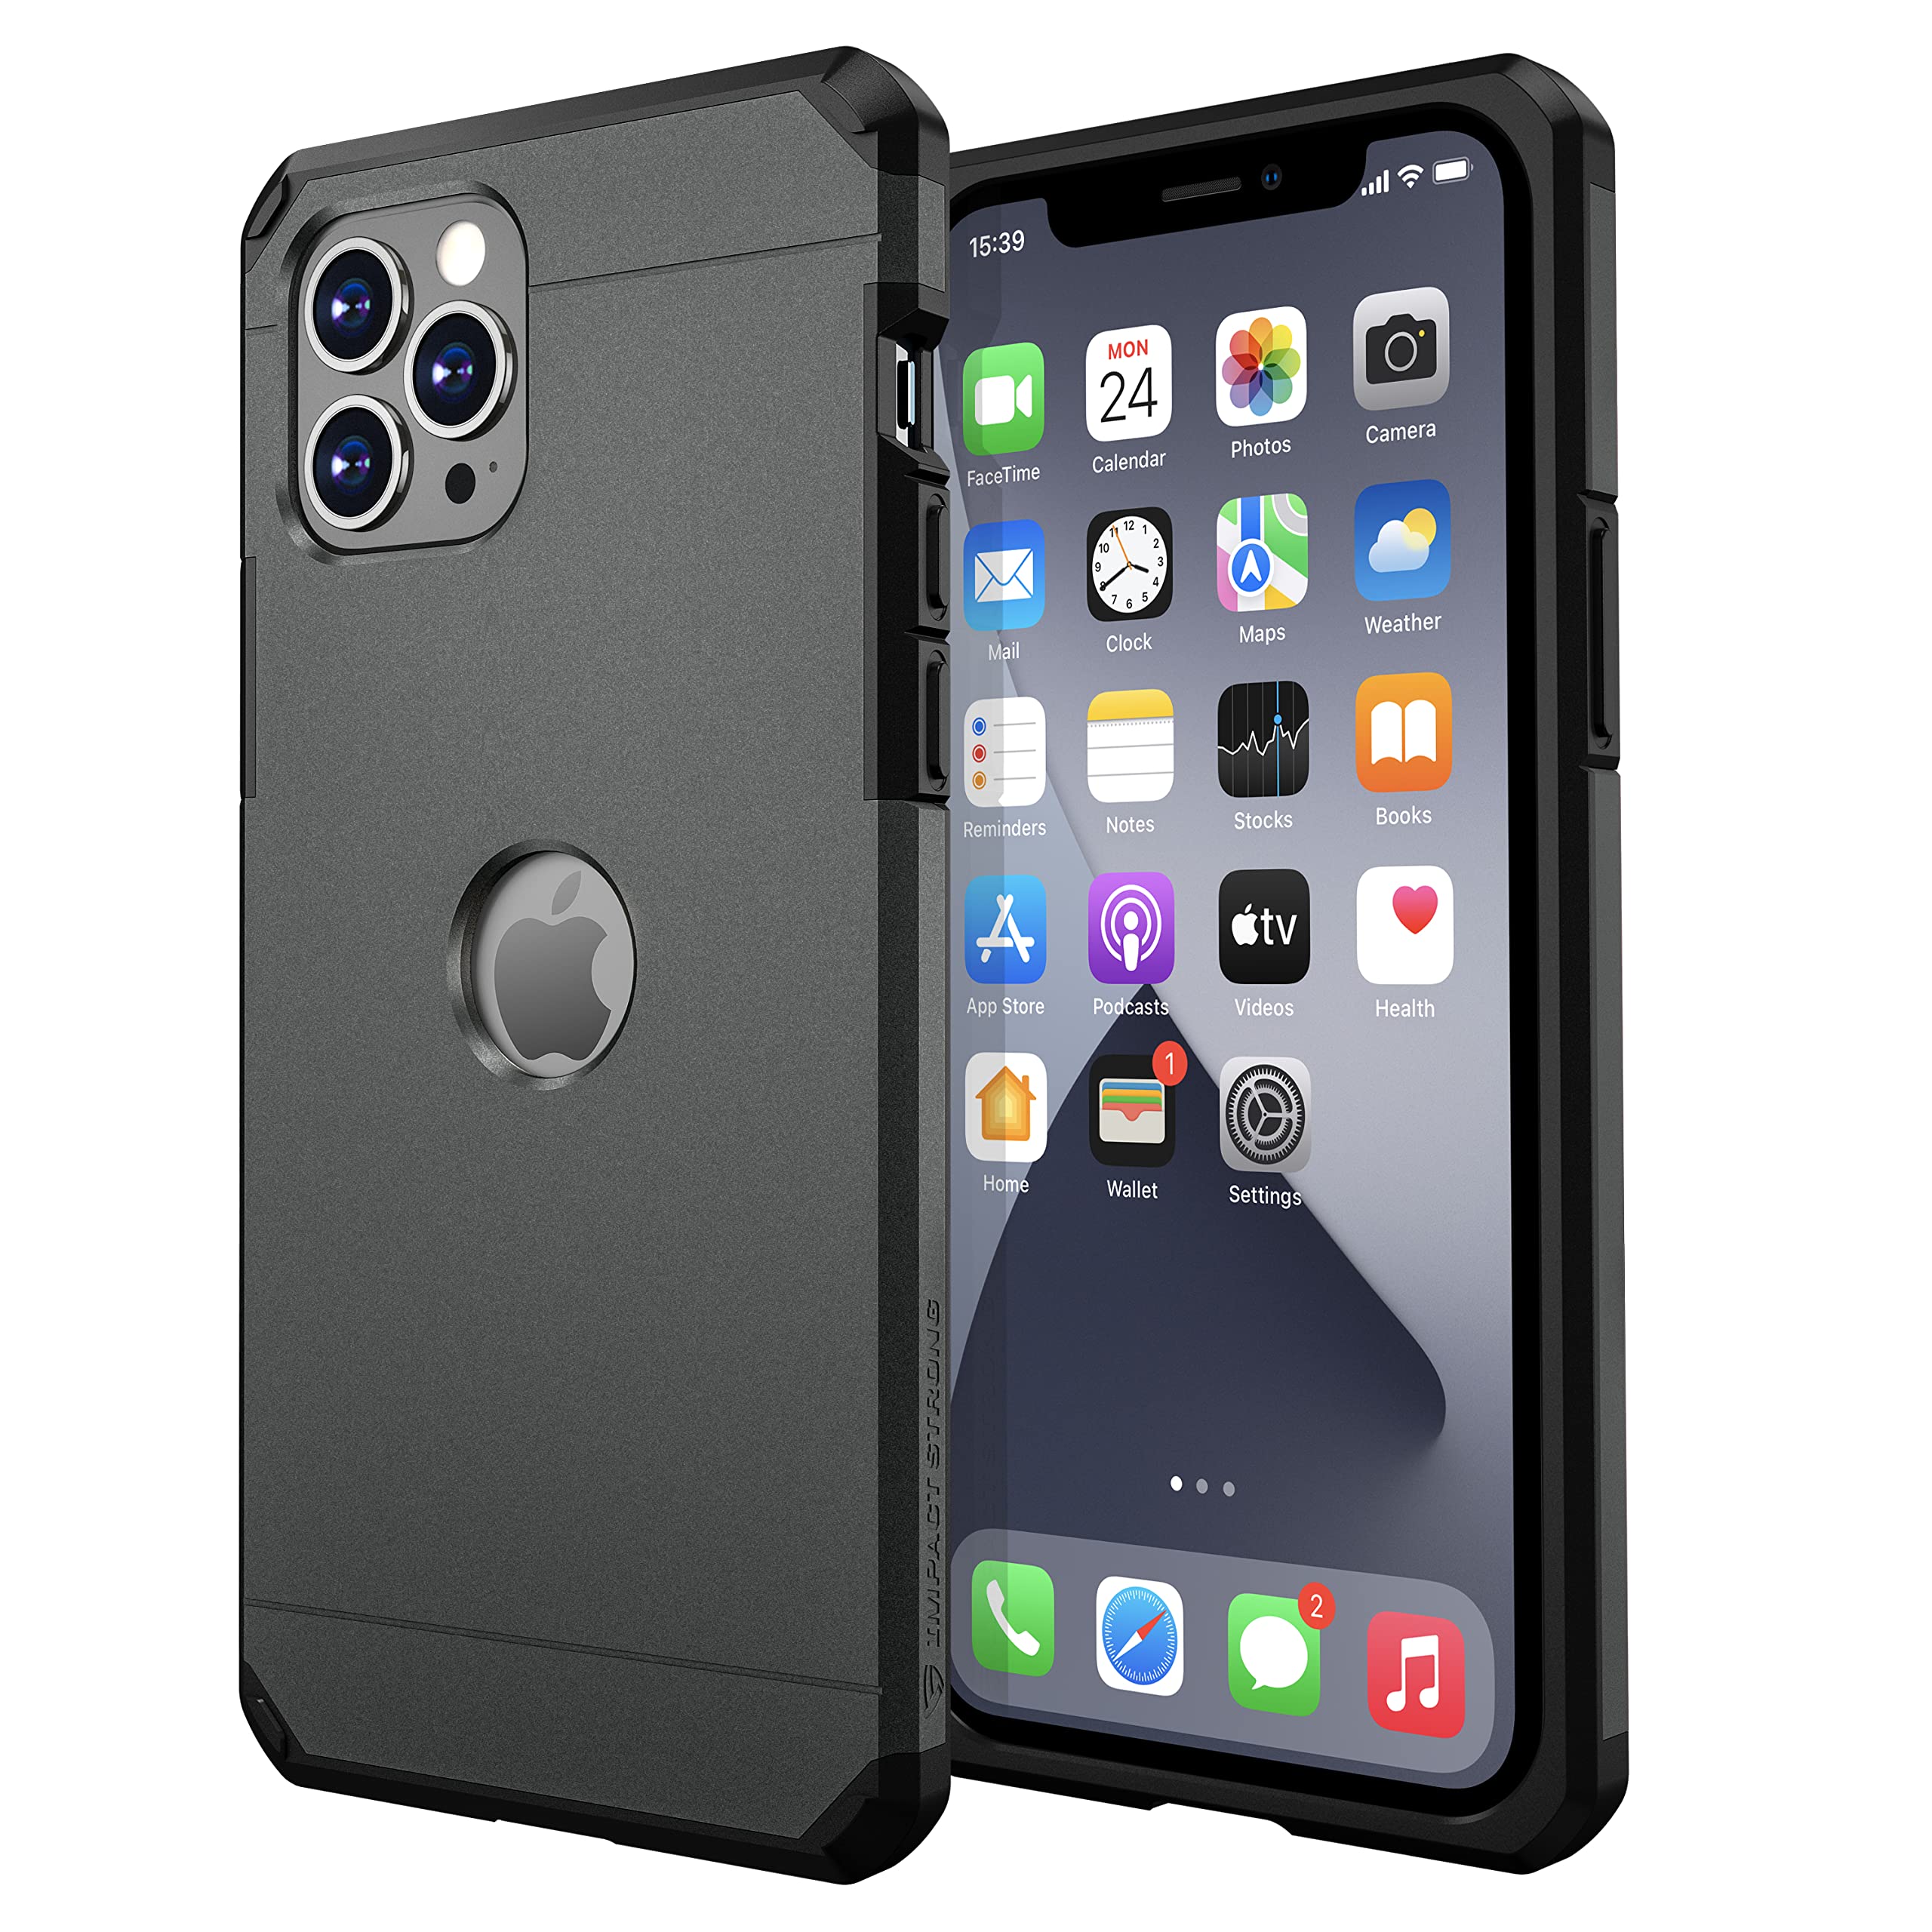 ImpactStrong Heavy Duty Compatible with iPhone 12 Pro Max Case, Dual Layer Protection Cover Heavy Duty Case Designed for iPhone 12 Pro Max (6.7 Inch) - Gun Metal